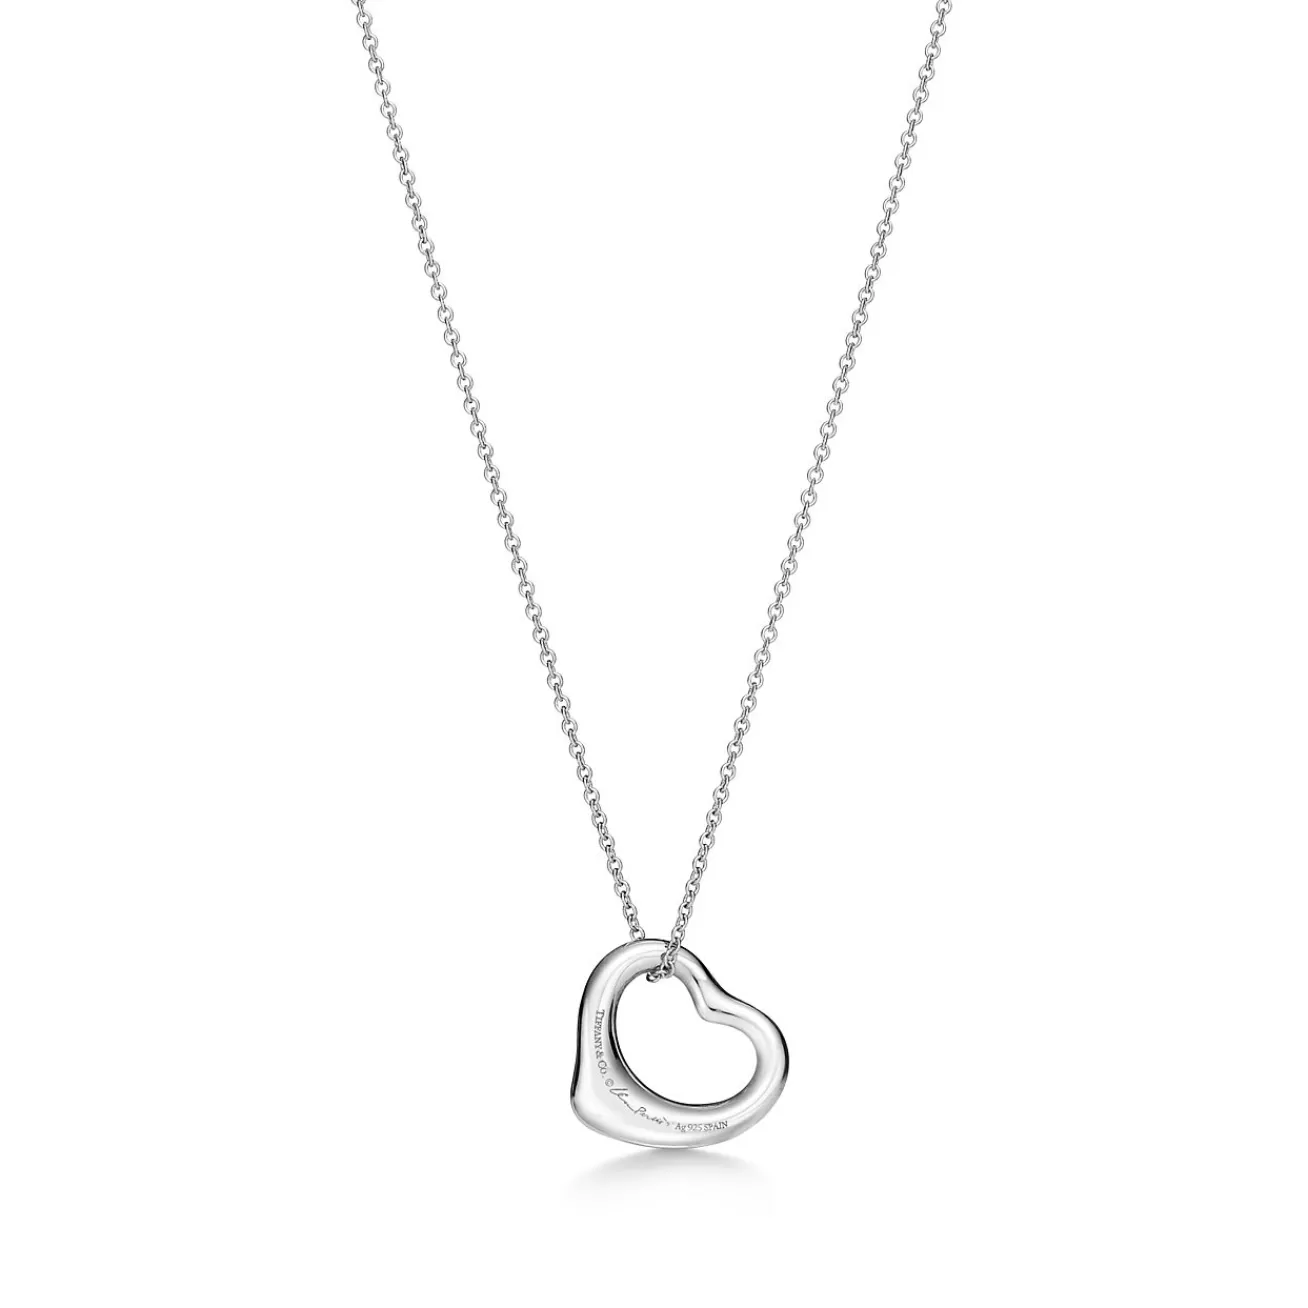 Tiffany & Co. Elsa Peretti® Open Heart pendant in sterling silver with diamonds. | ^ Necklaces & Pendants | Gifts for Her